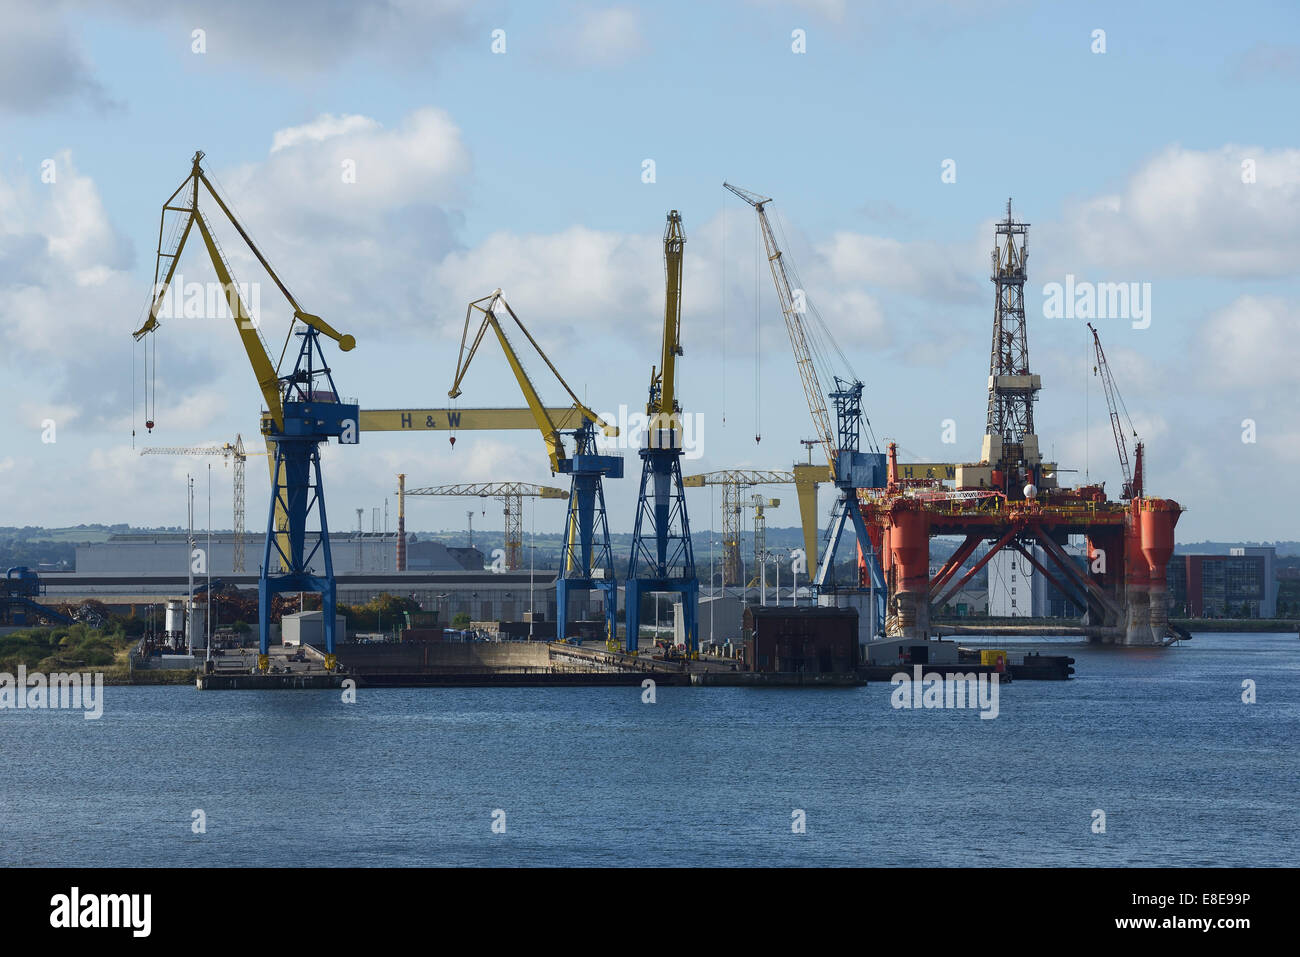 The Harland and Wolff gantry cranes plus the Borgny Dolphin oil rig platform in Belfast Harbour Stock Photo